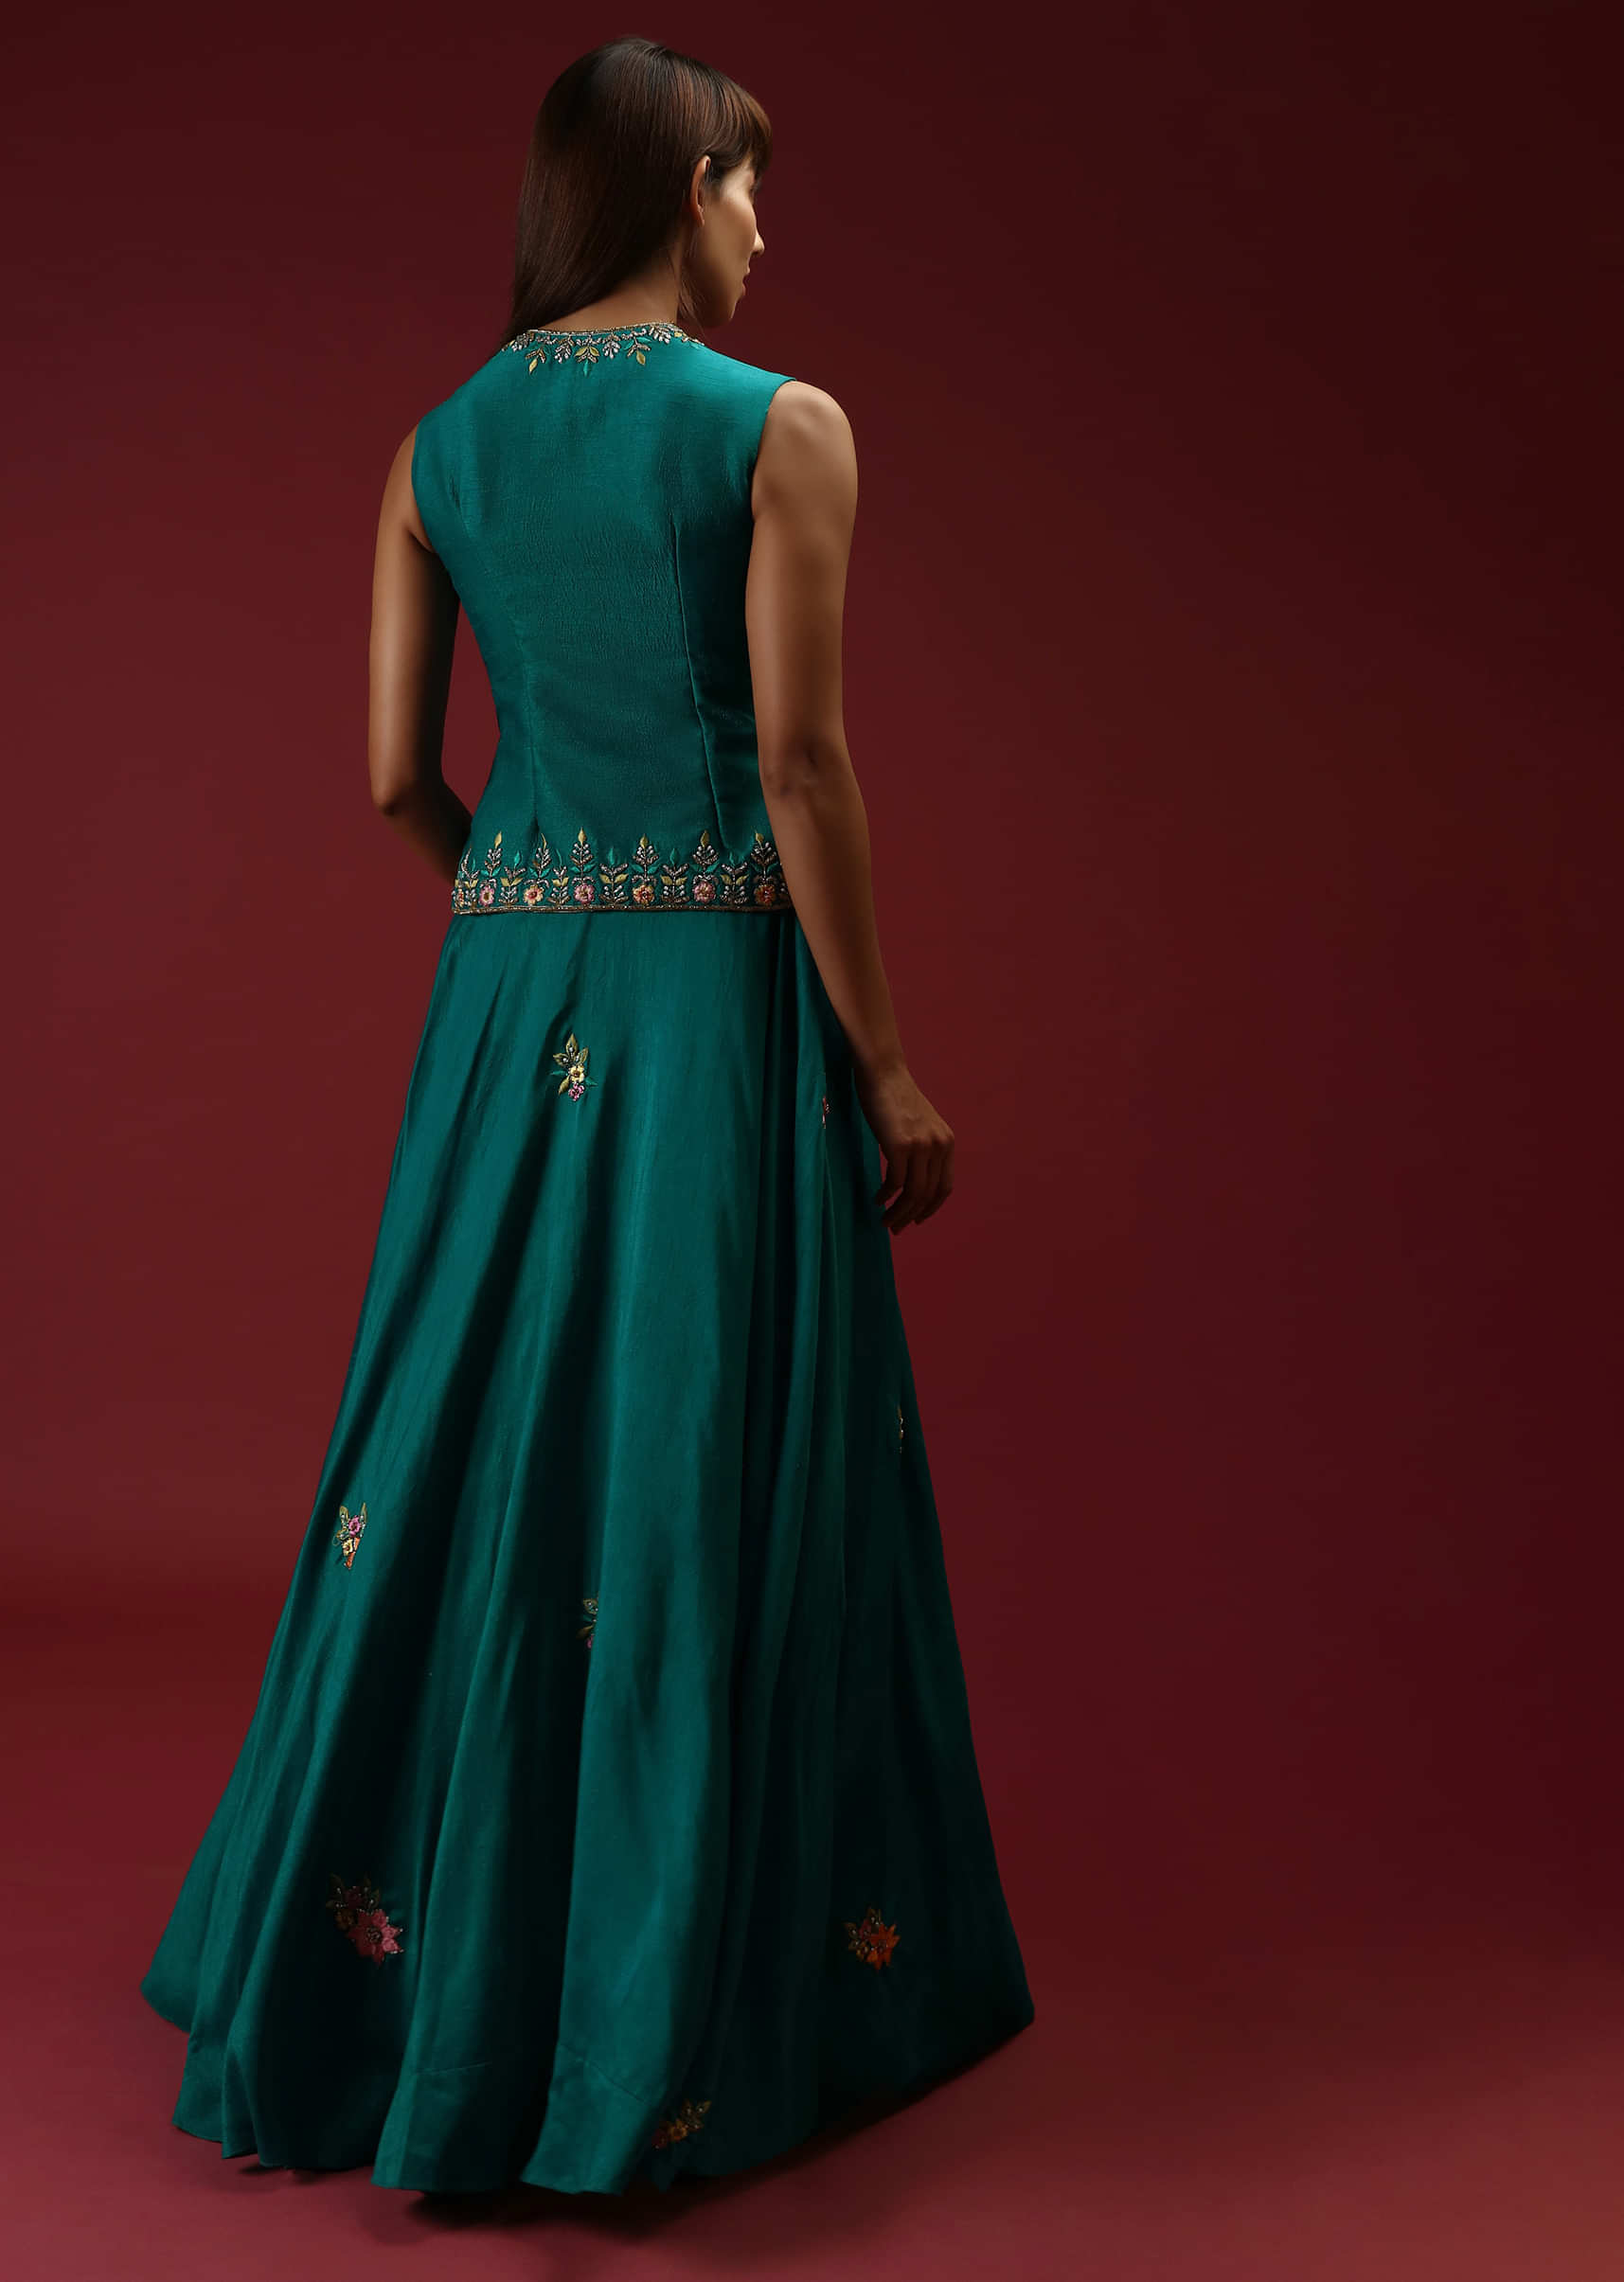 Teal Blue Lehenga And Long Top In Raw Silk With Multi Colored Resham And Moti Embroidered Floral Design 